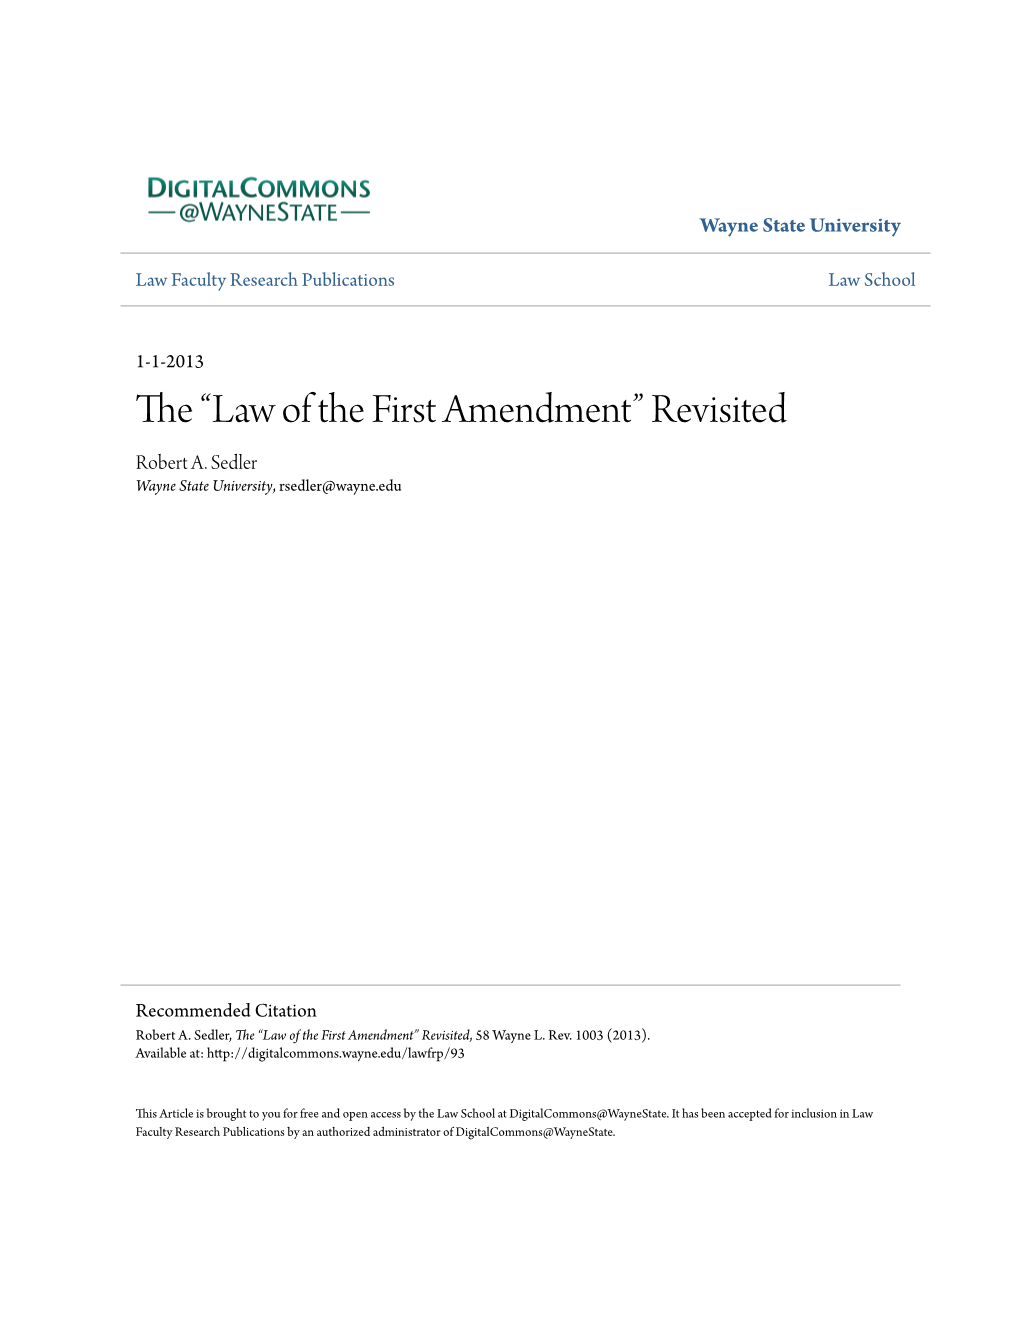 The “Law of the First Amendment” Revisited Robert A